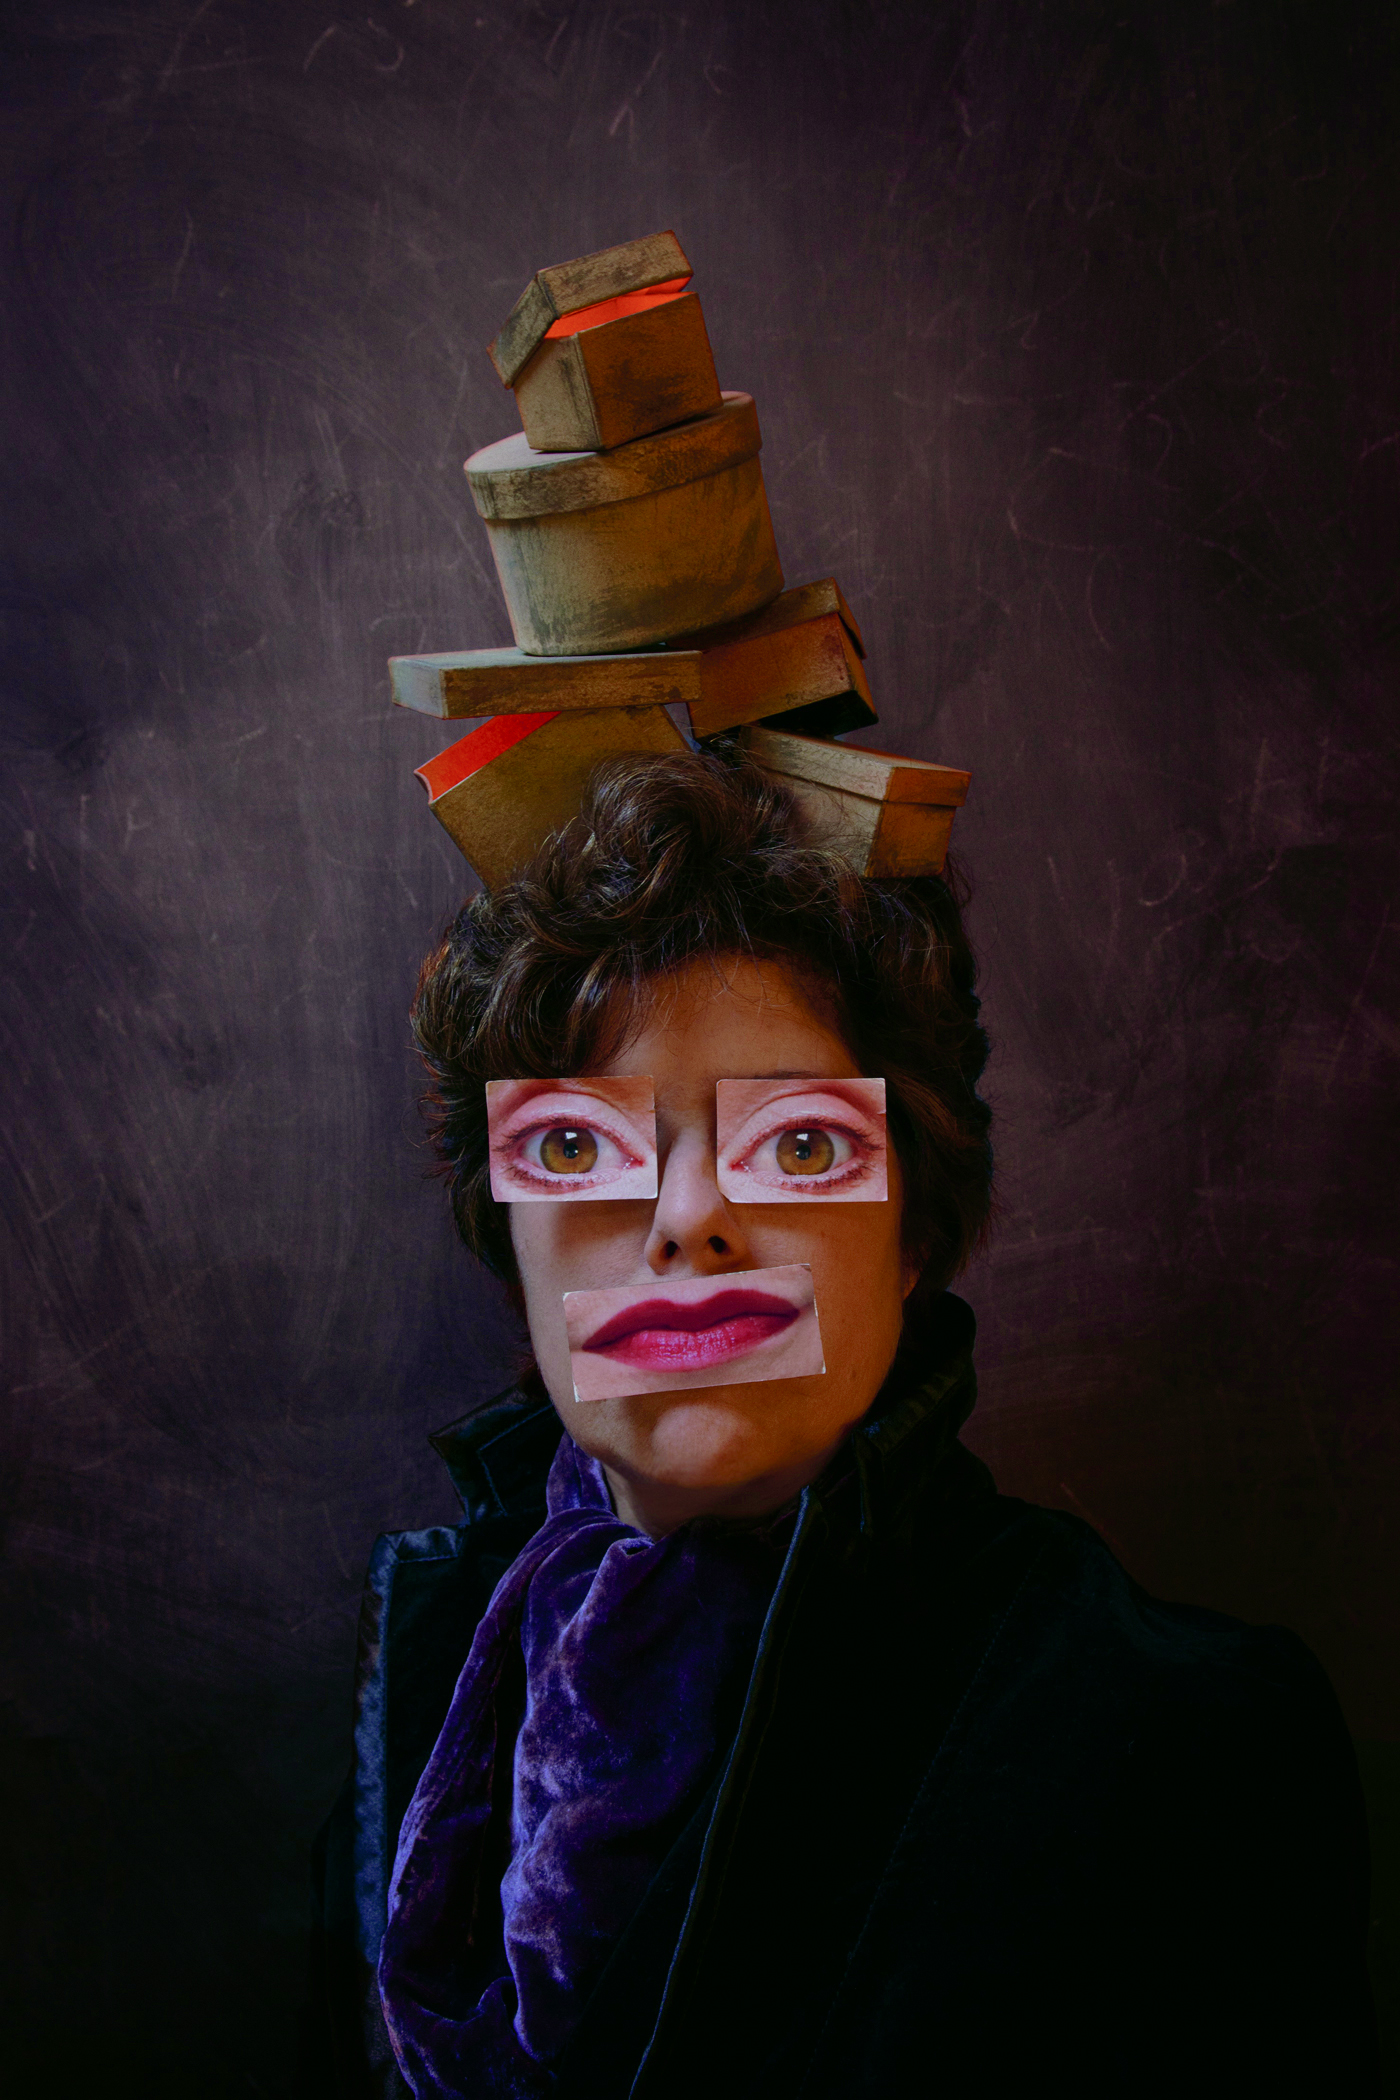 Woman with boxes on her head and cutout eyes and mouth